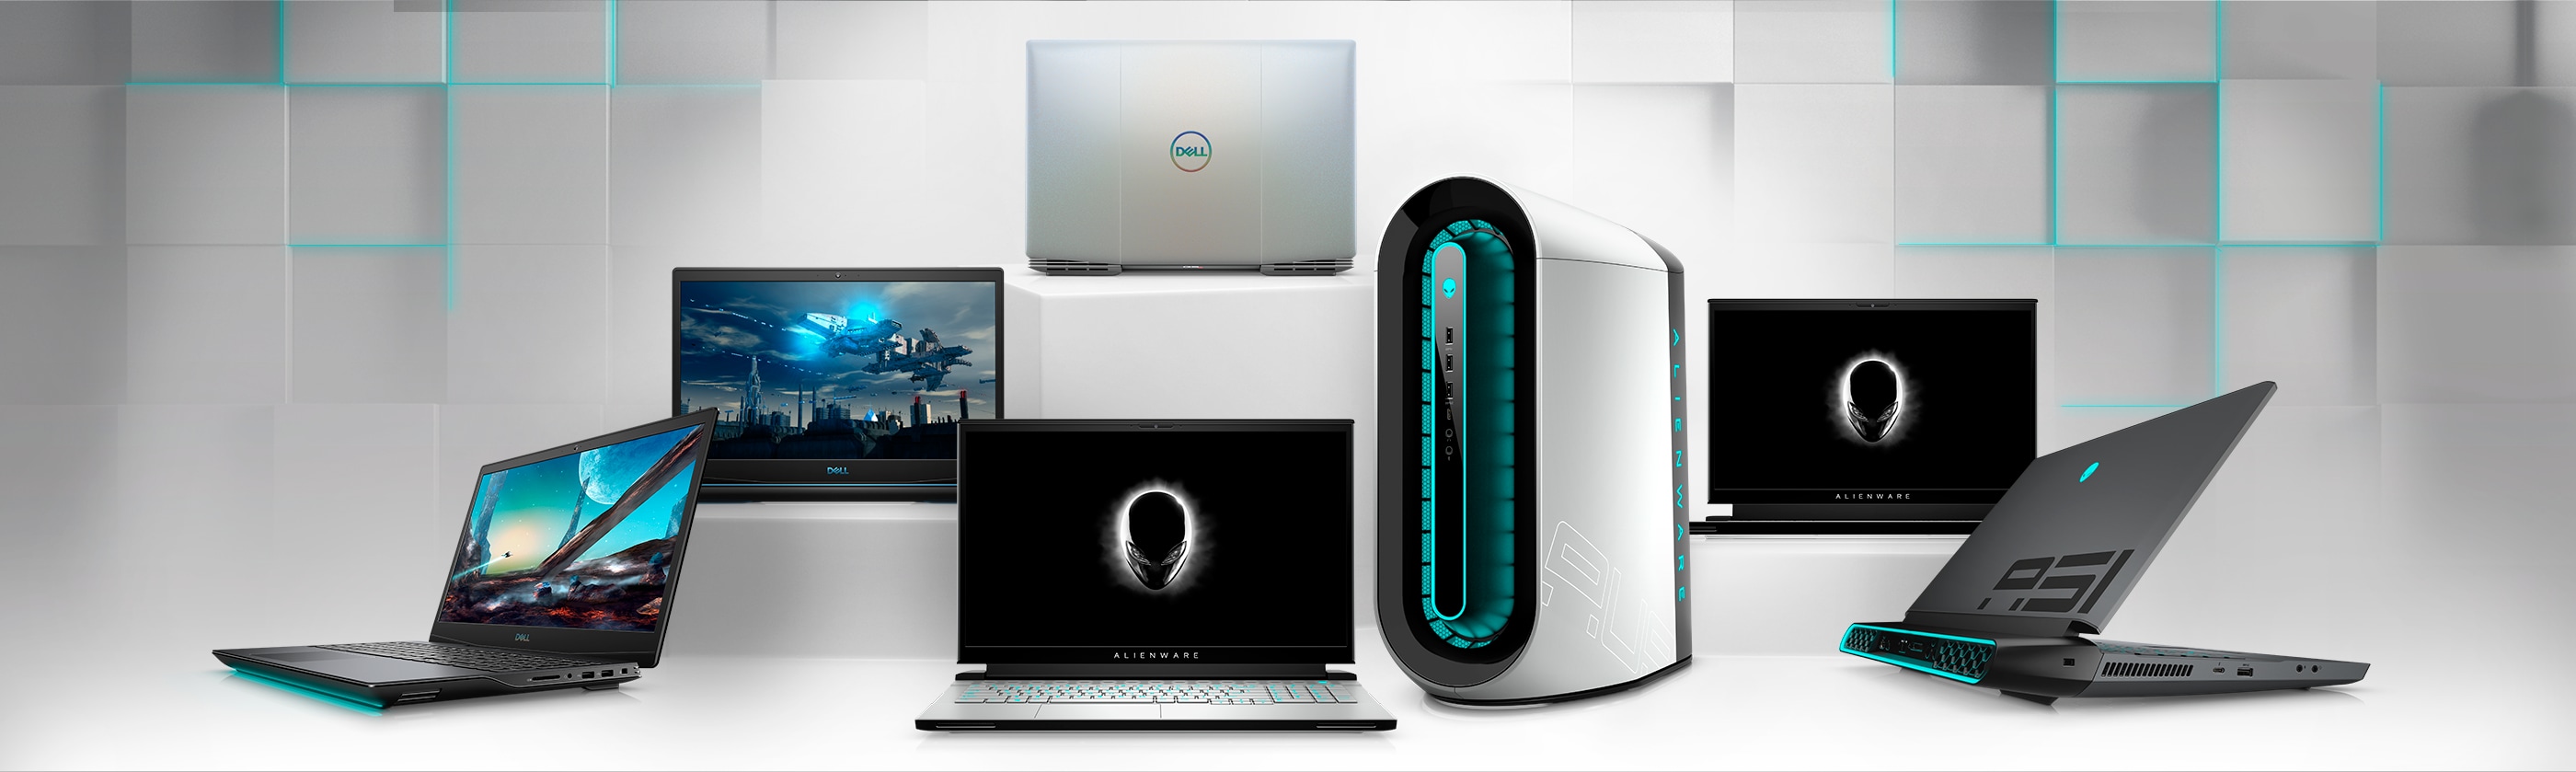 New from Alienware and G Series